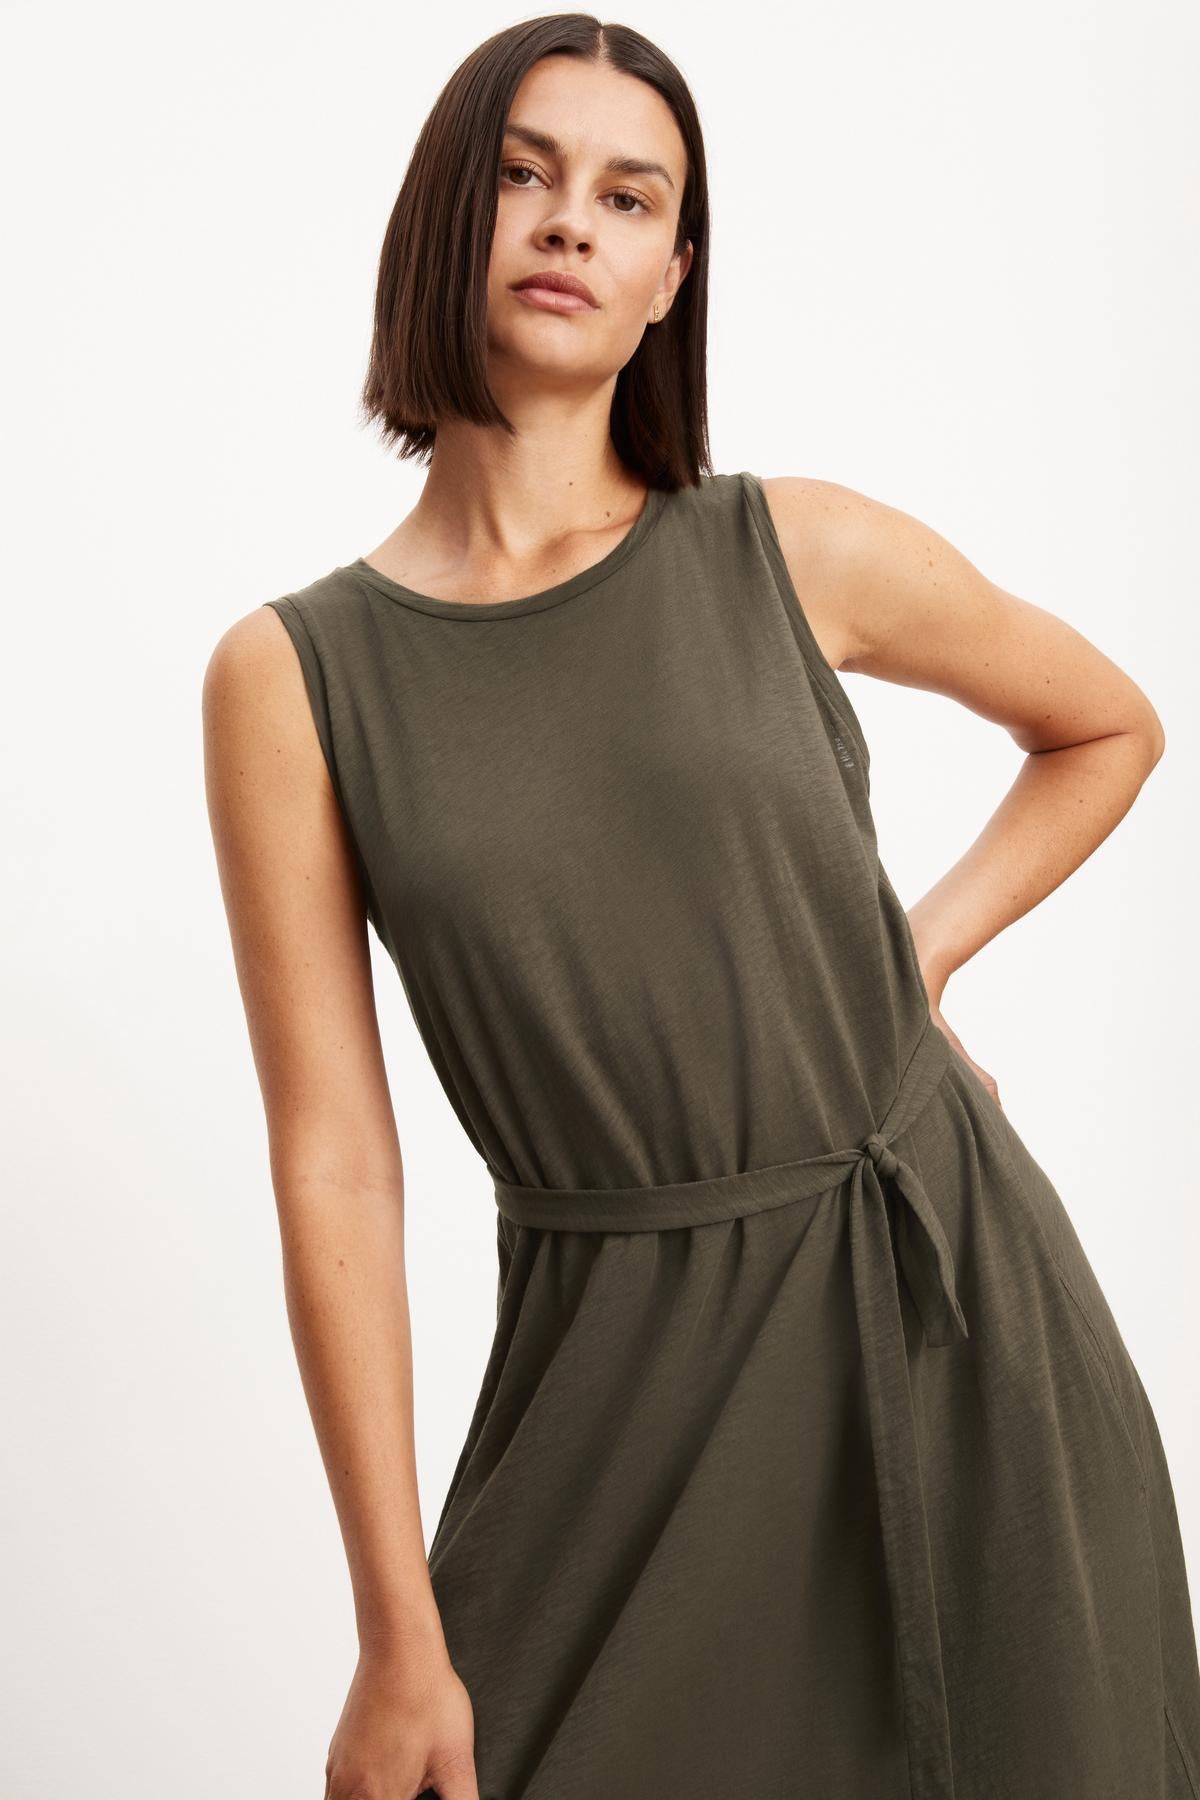 The EDITH SLEEVELESS MAXI DRESS by Velvet by Graham & Spencer in olive green features a long silhouette and slash pockets.-35701765865665